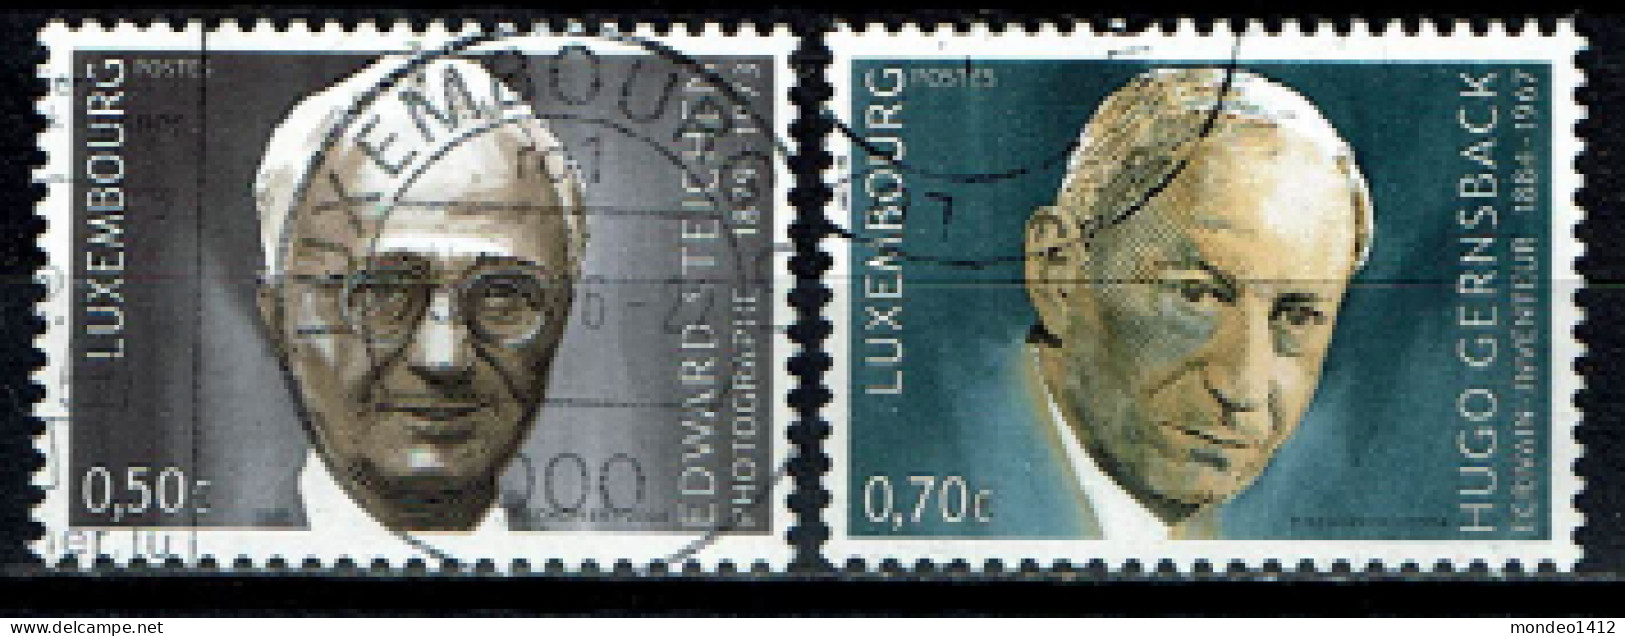 Luxembourg 2004 - YT 1582/1583 - Famous Persons, H. Steichen, H. Gernsback - Usati